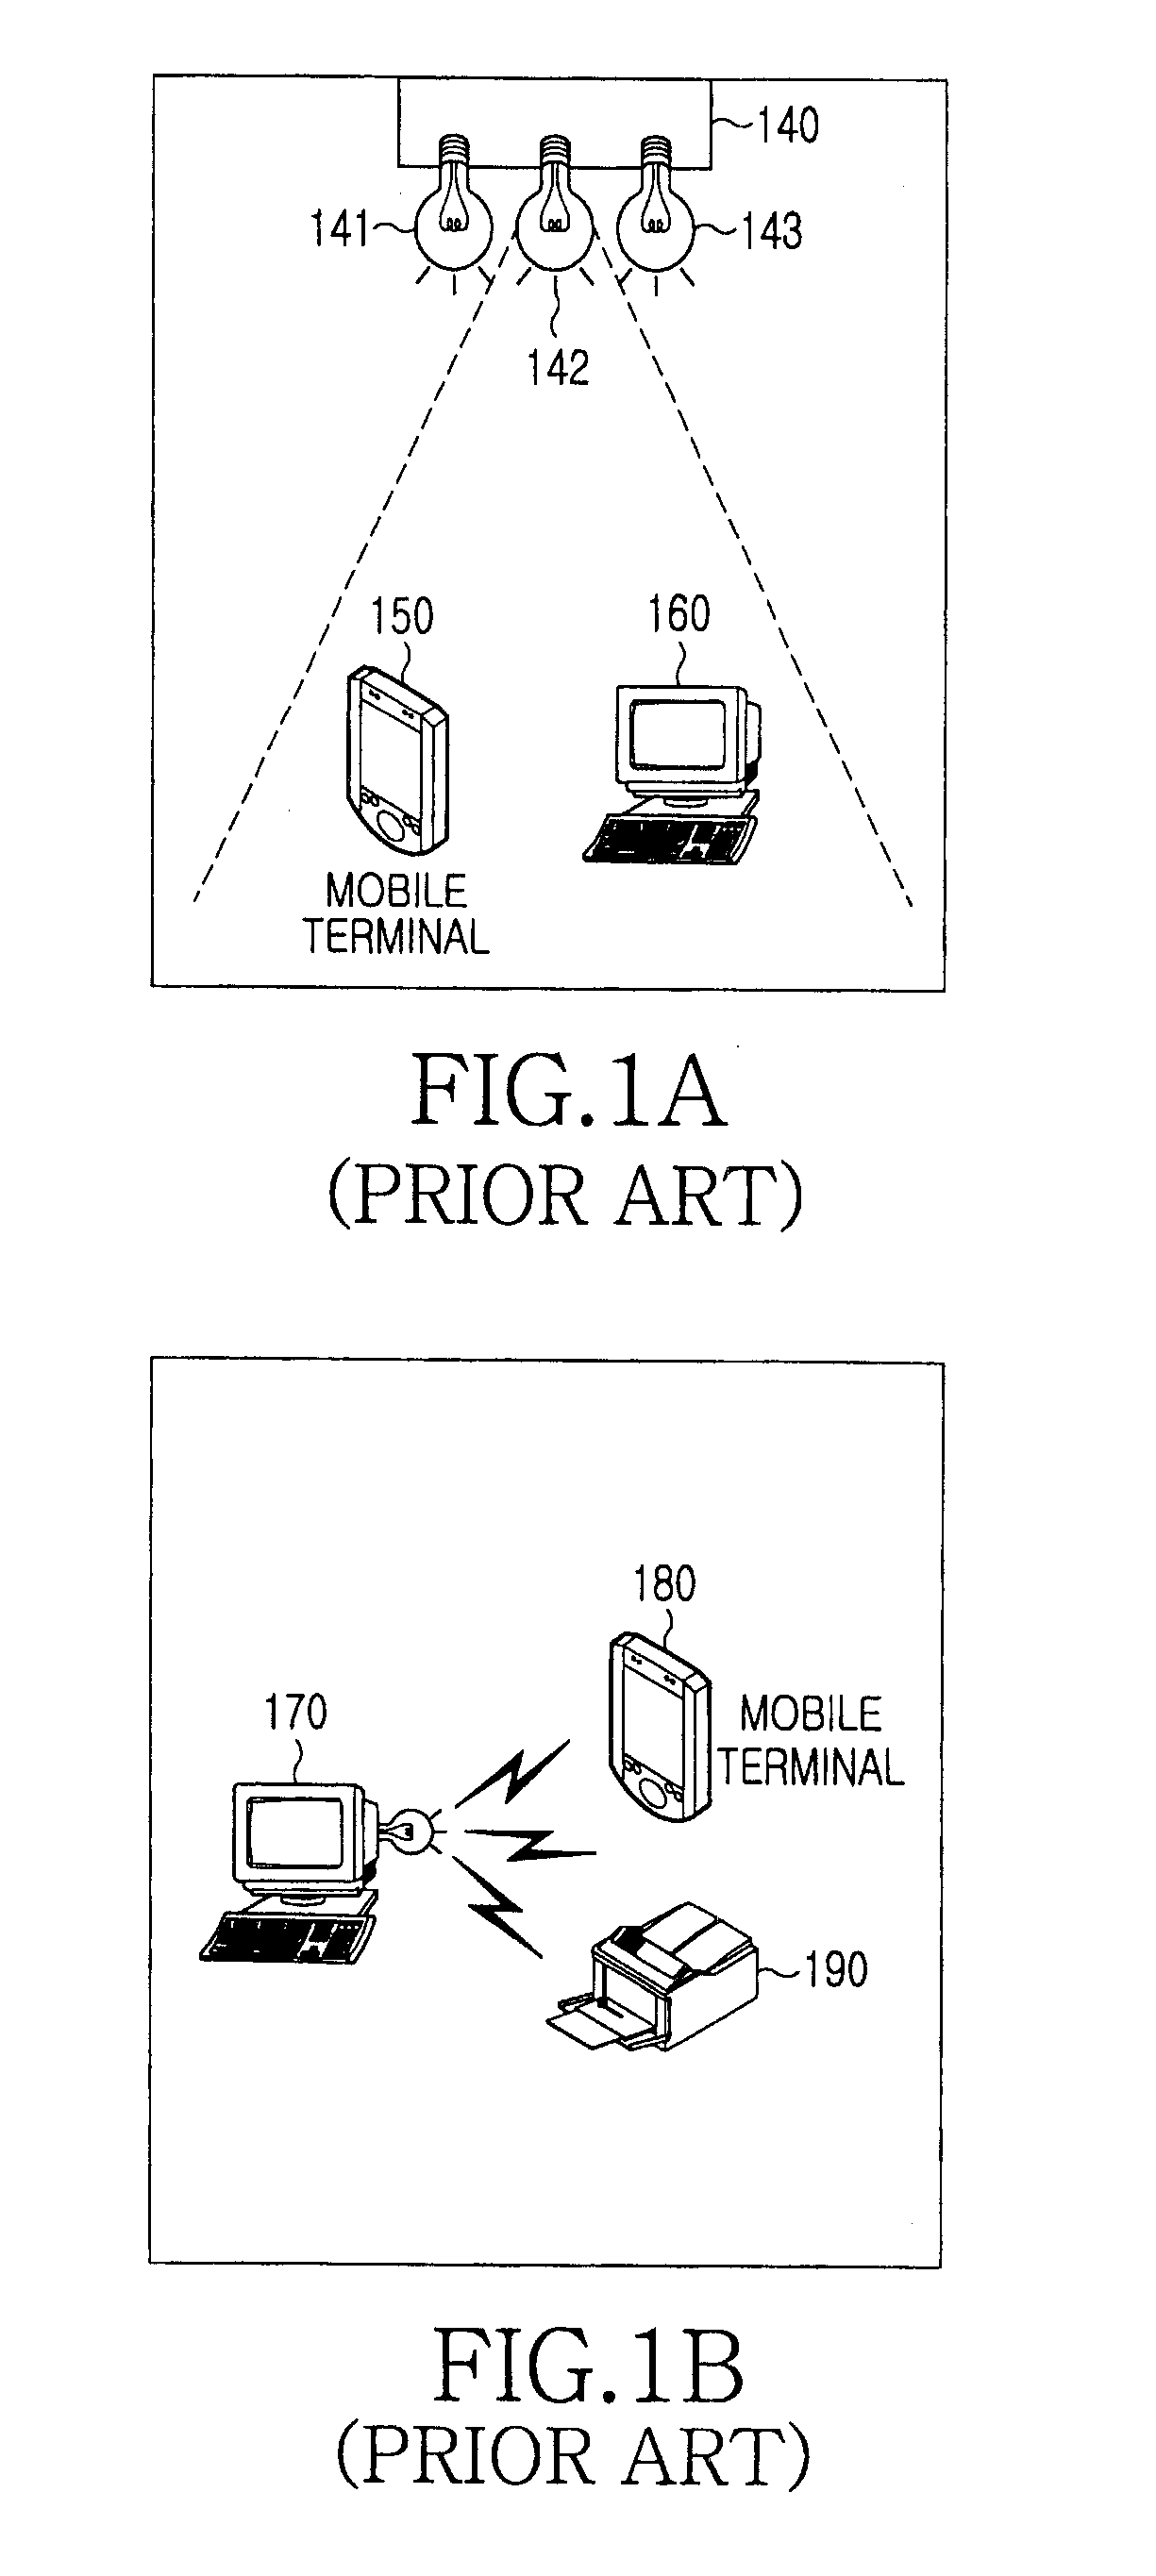 Method for exchanging messages in a navigation system using visible light communications